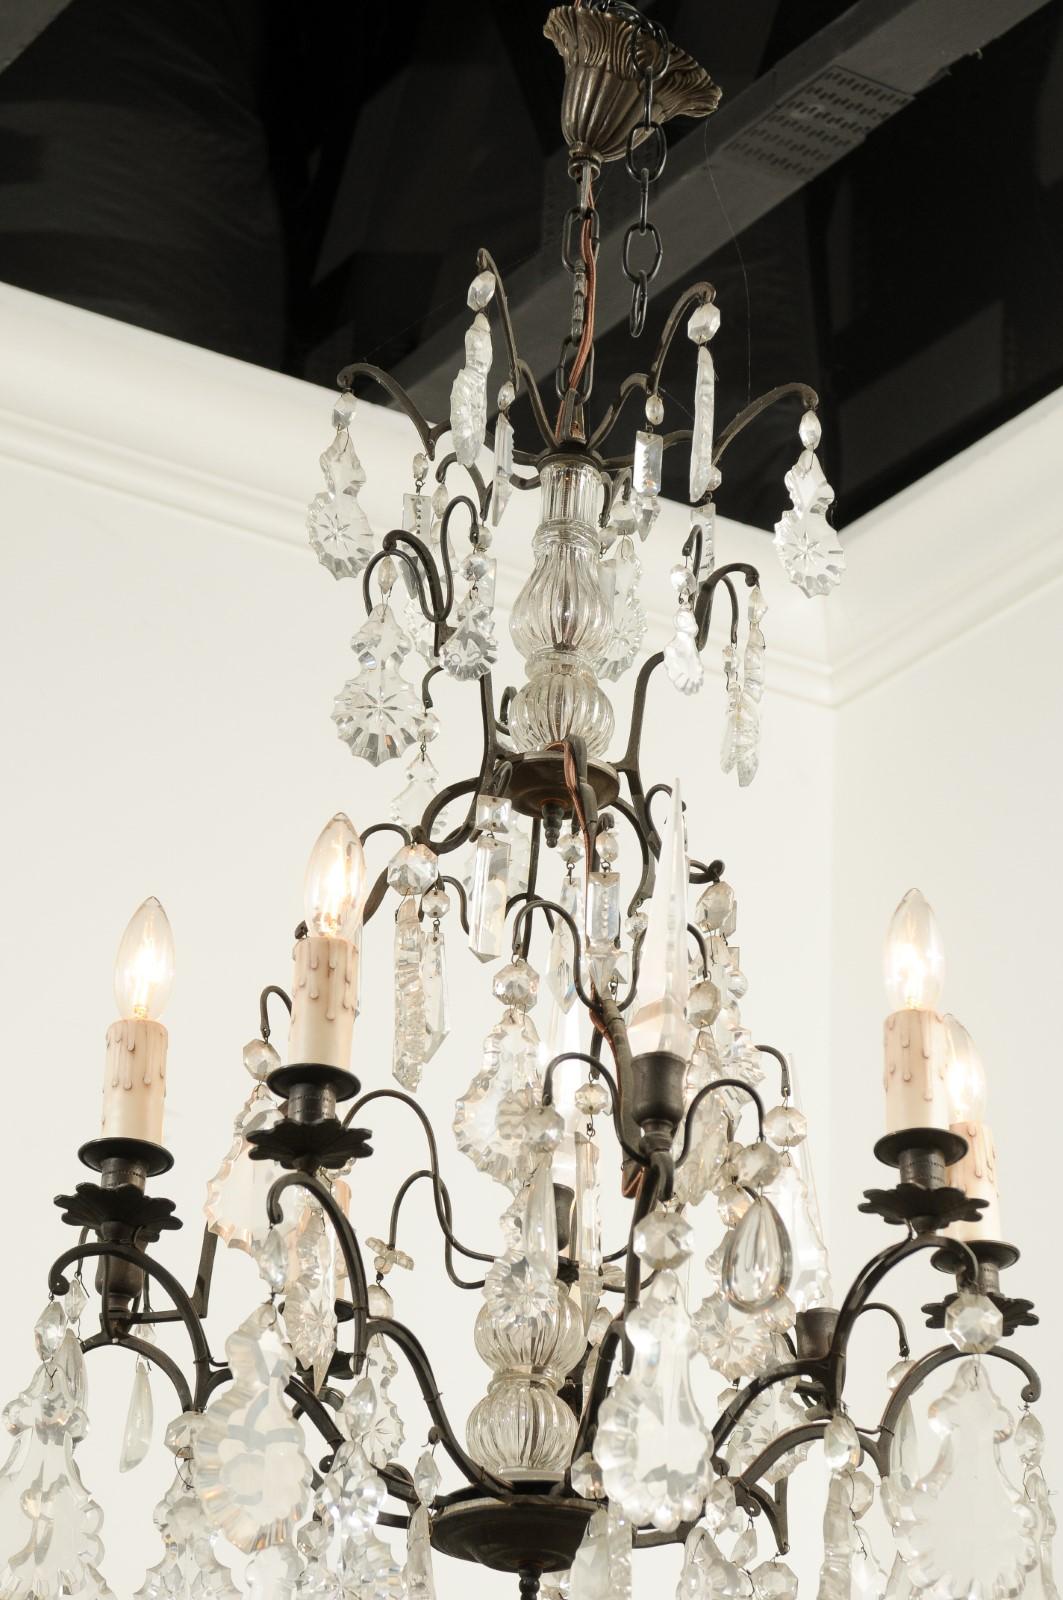 19th Century French Six-Light Crystal Chandelier with Iron Armature, Pendeloques and Obelisks For Sale